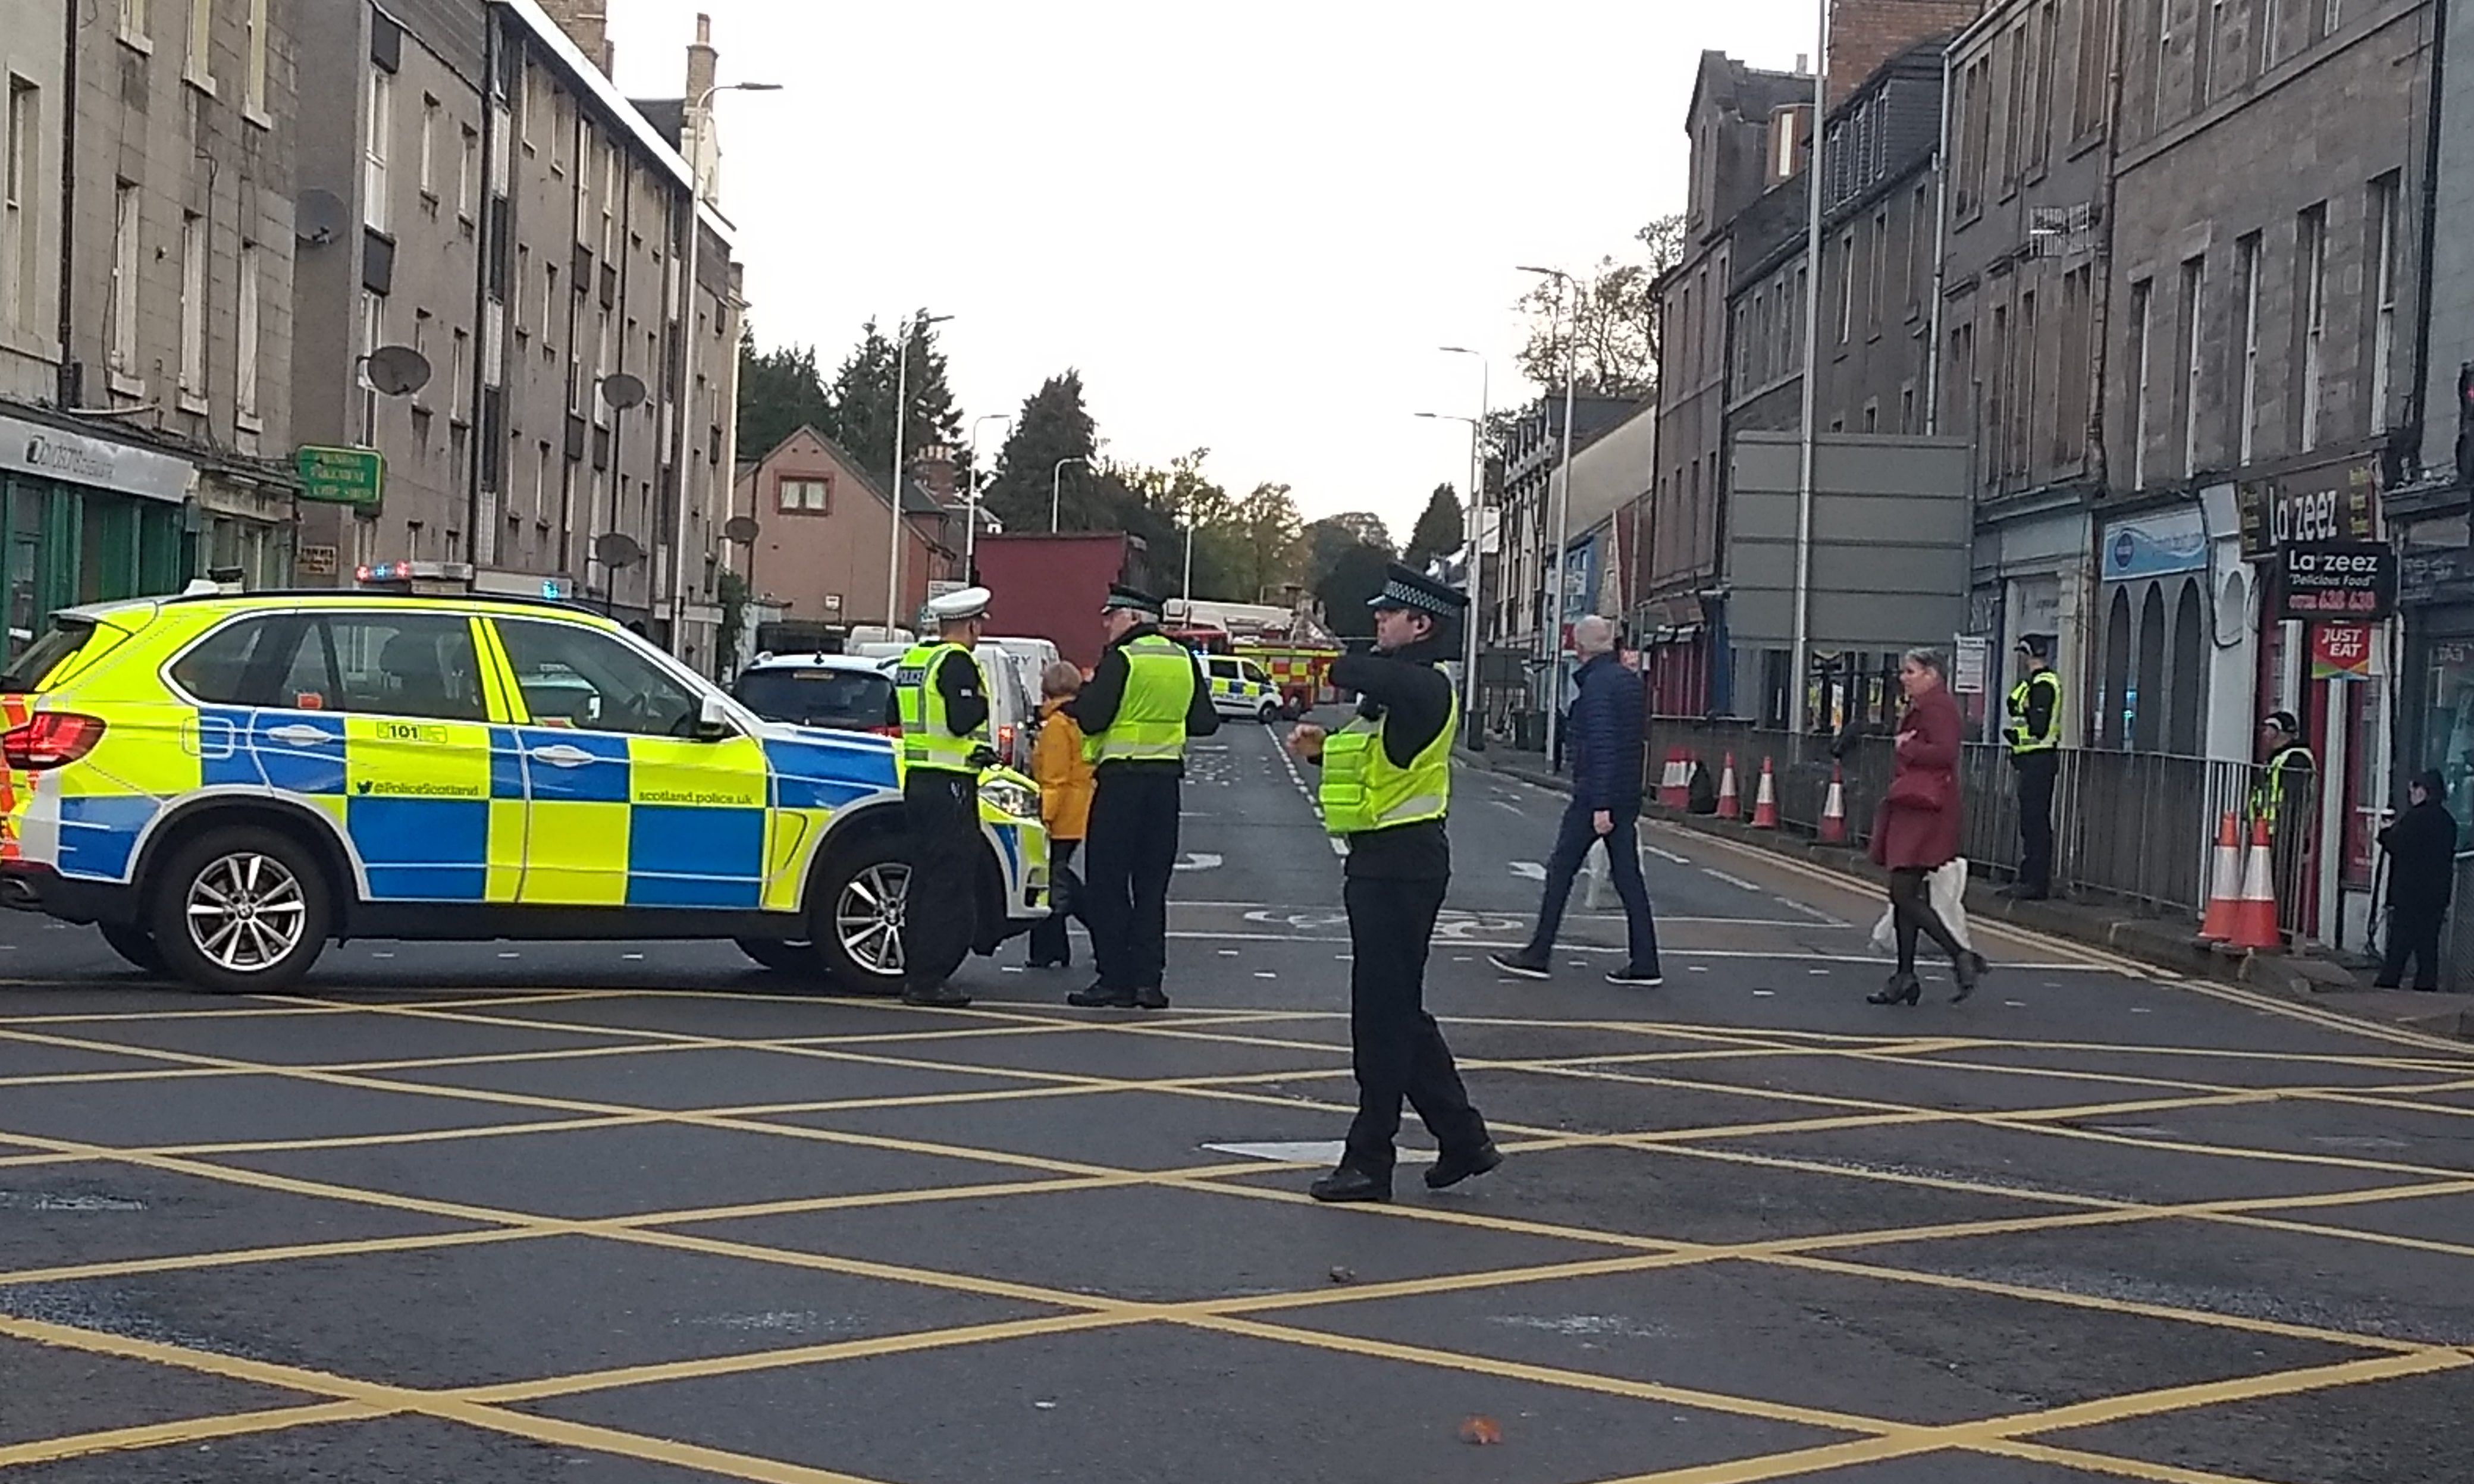 Police on the scene after the accident in the Bridgend Co-op.